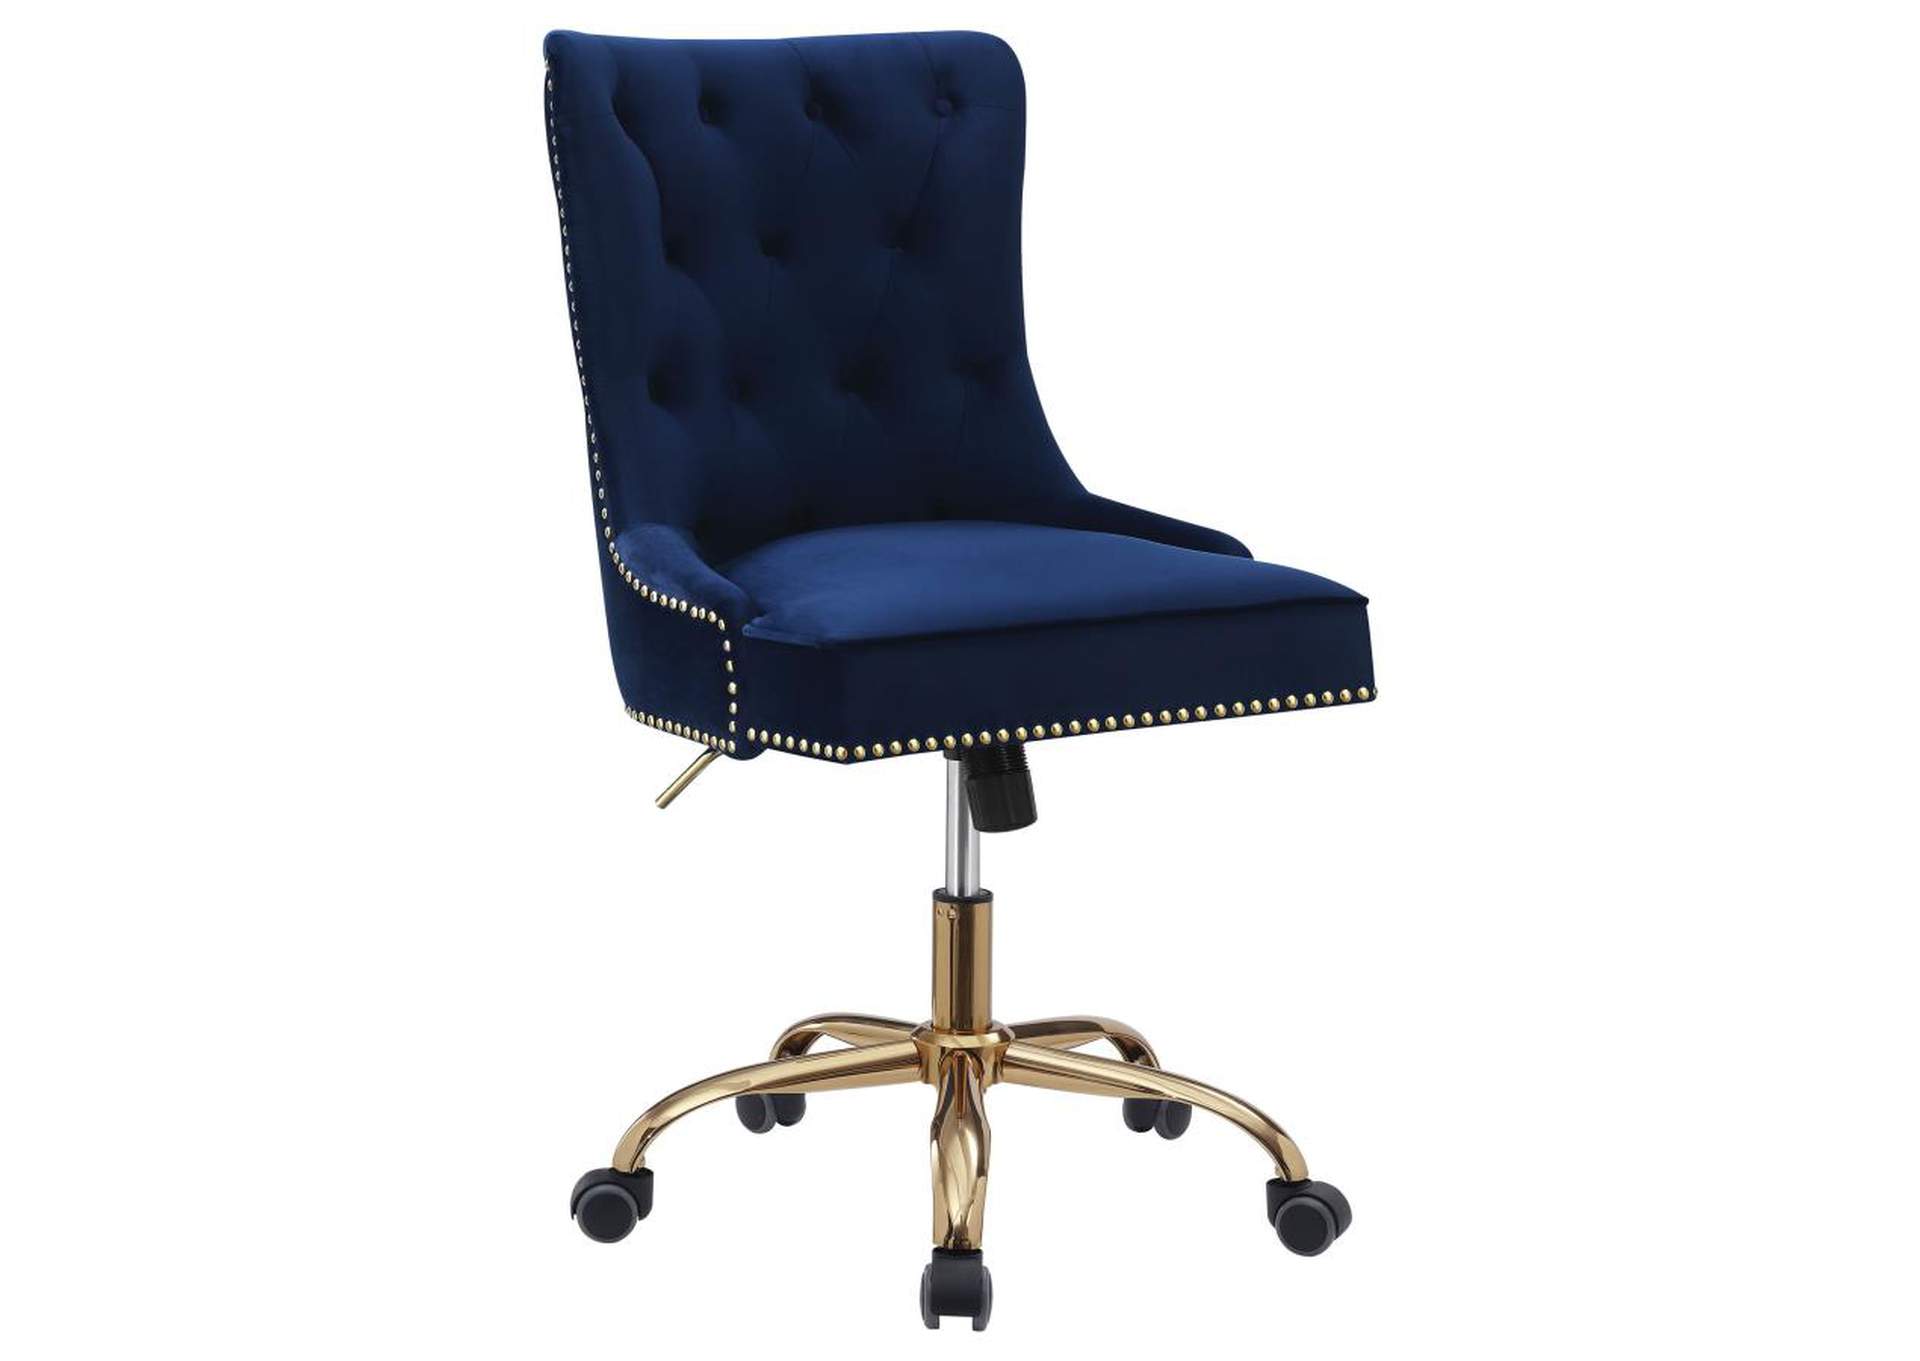 Bowie Upholstered Office Chair With Nailhead Blue And Brass,Coaster Furniture